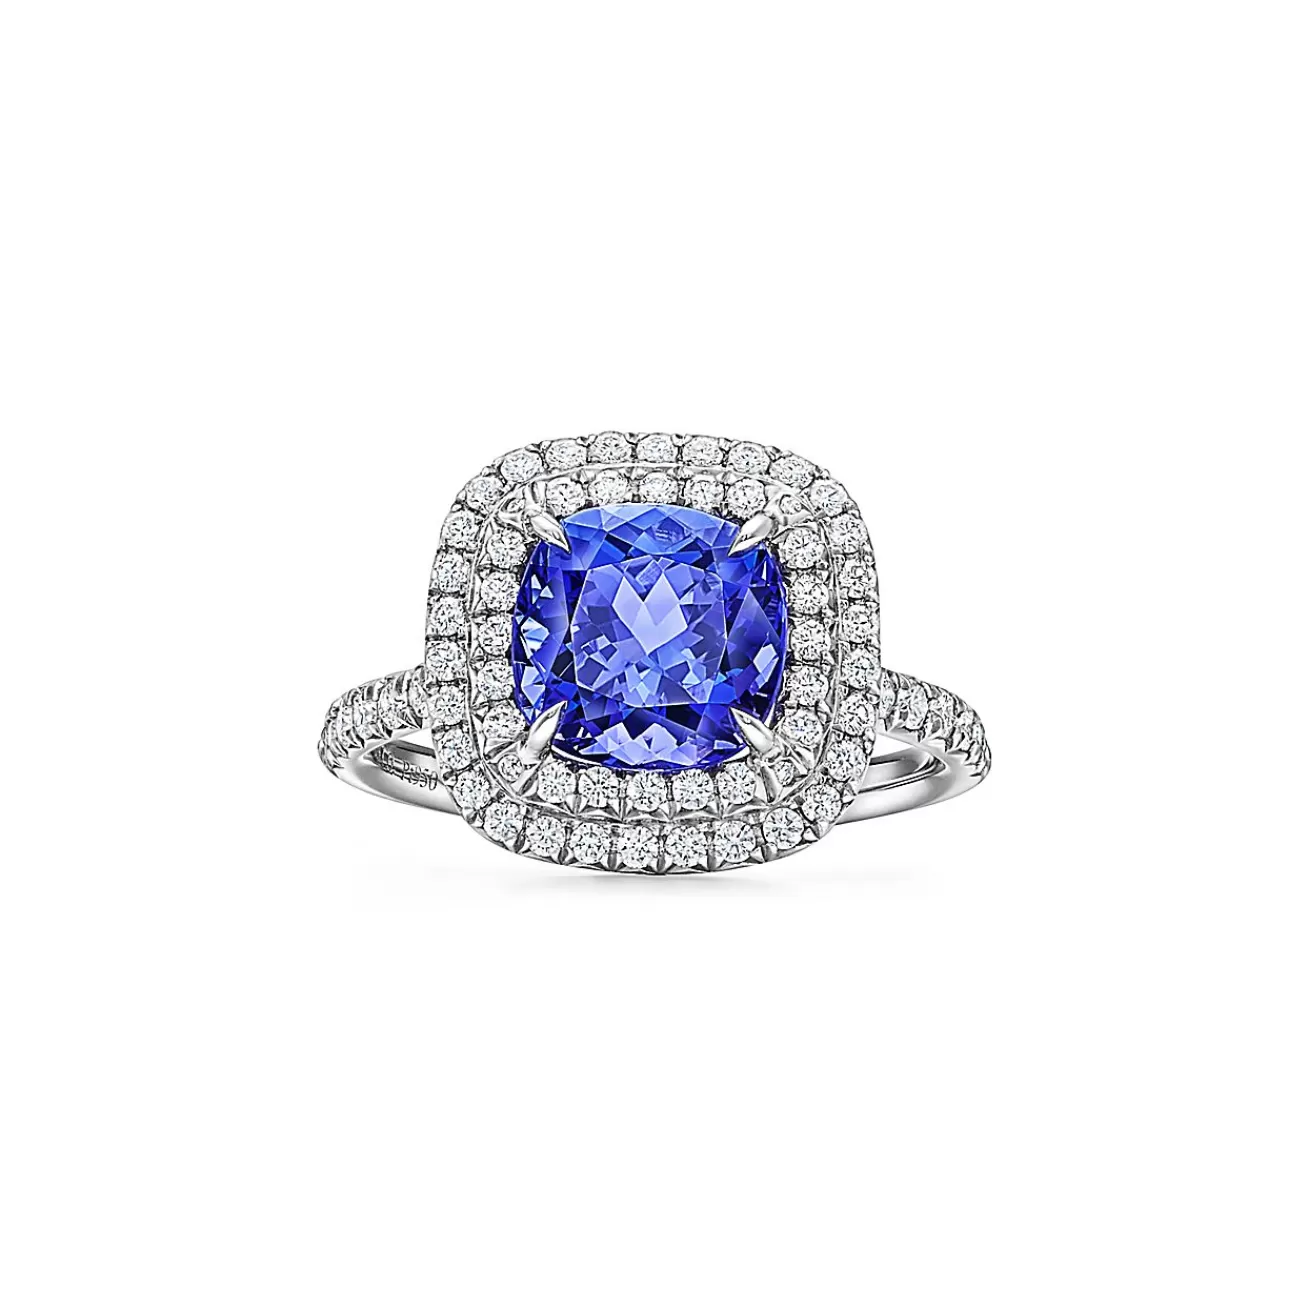 Tiffany & Co. Tiffany Soleste ring in platinum with diamonds and a tanzanite. | ^ Rings | Platinum Jewelry